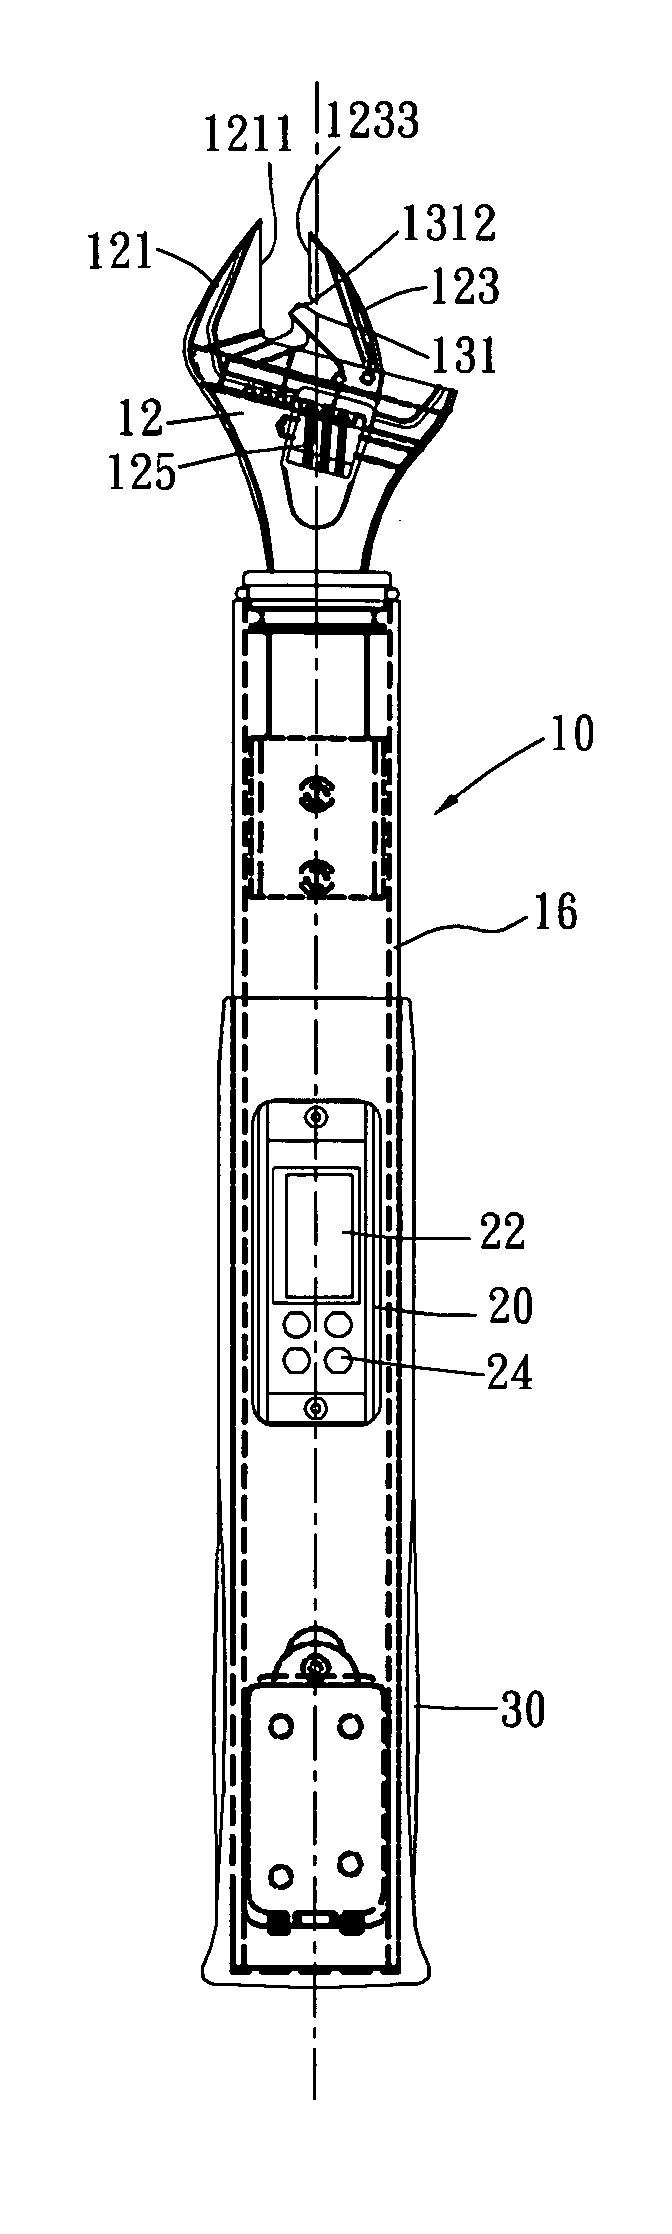 Adjustable spanner with electronic strain gauge function